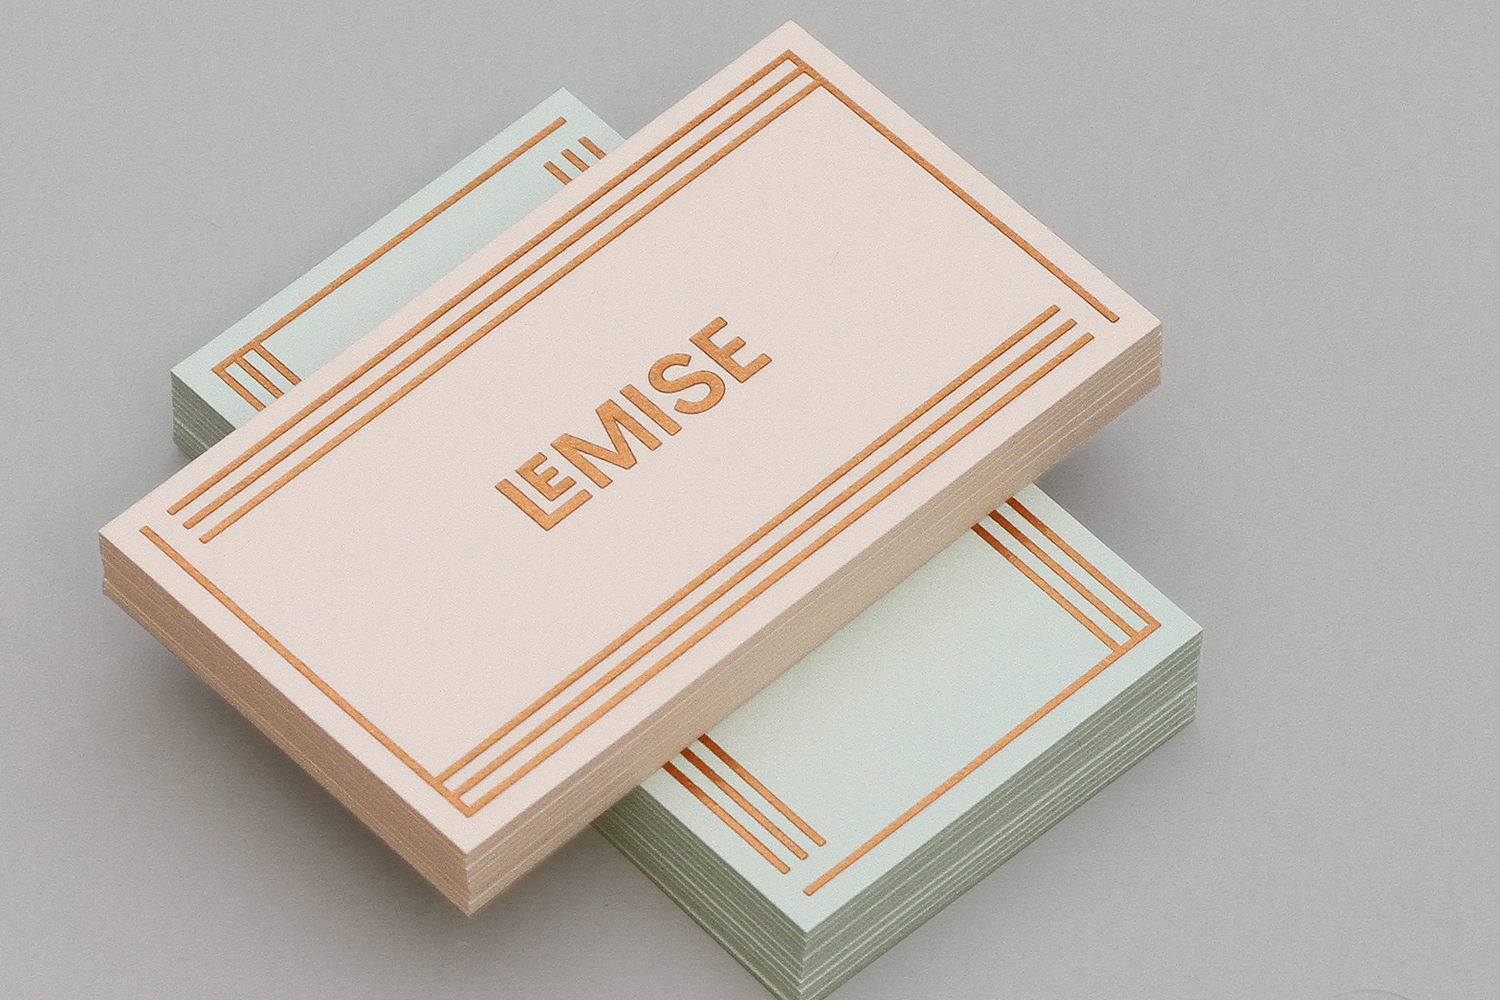 Pastel Colour in Branding – LeMise by DIA, United States